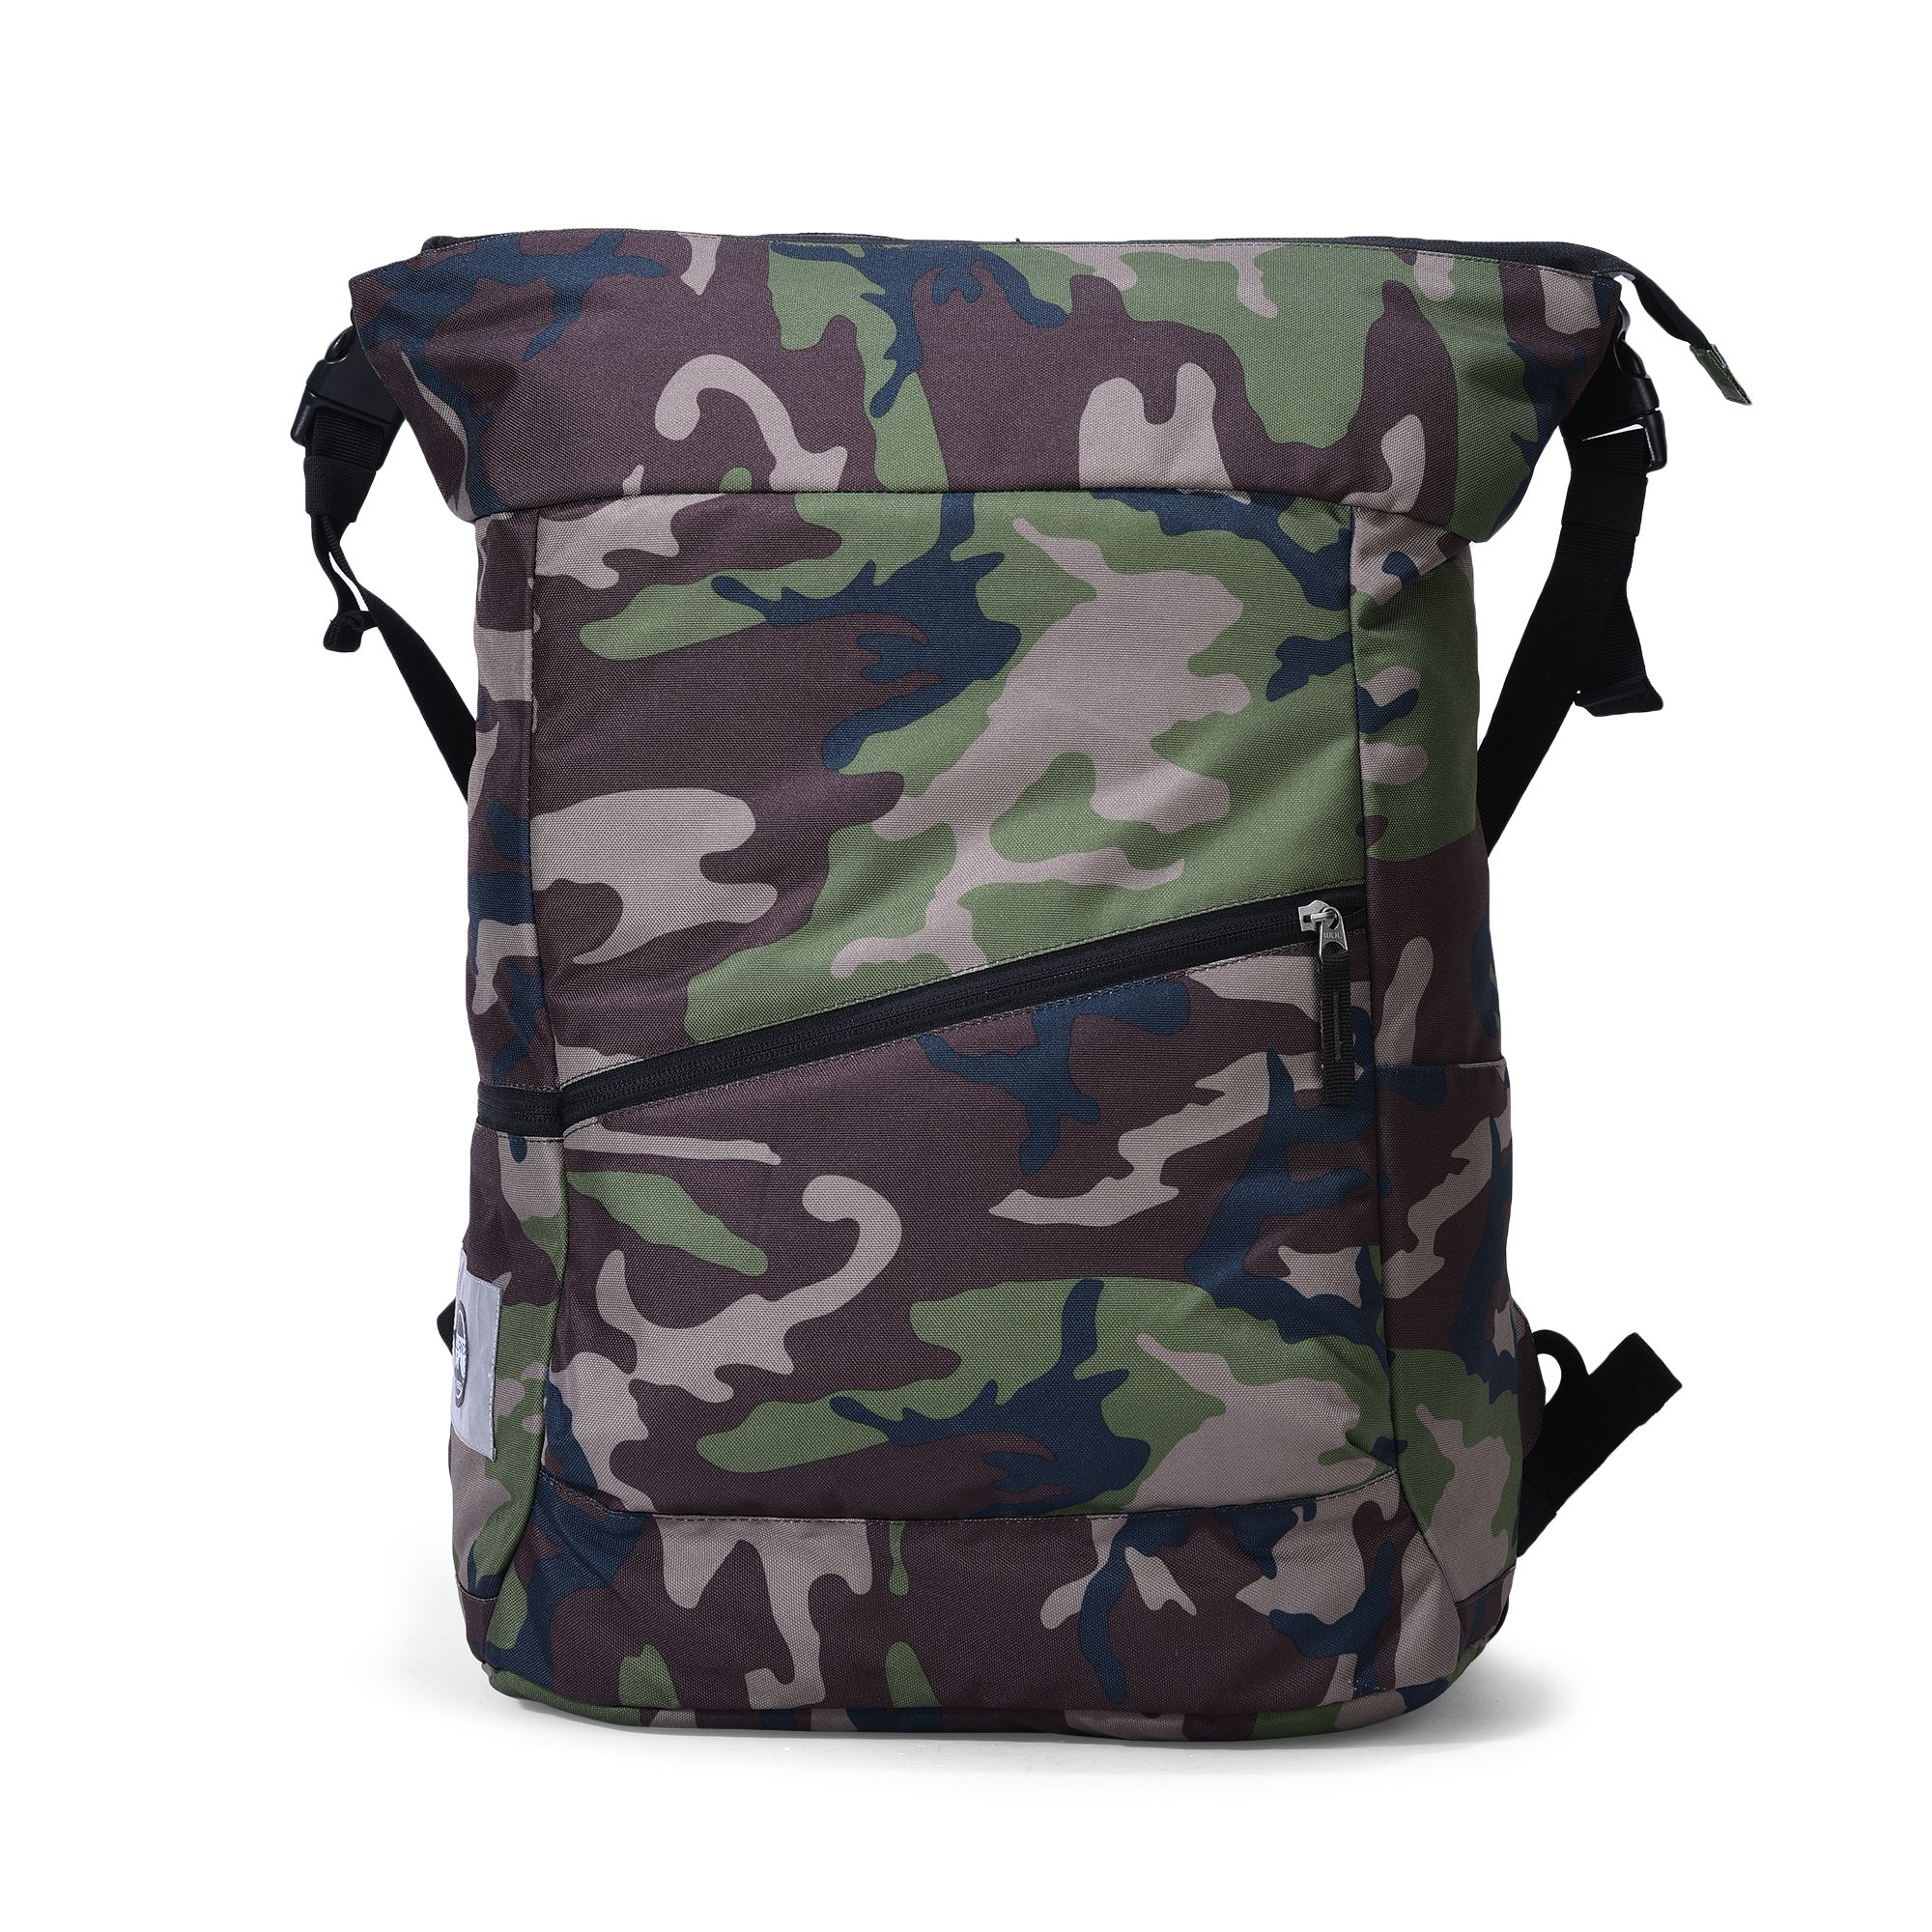 men women bags gear about us labs search products search products